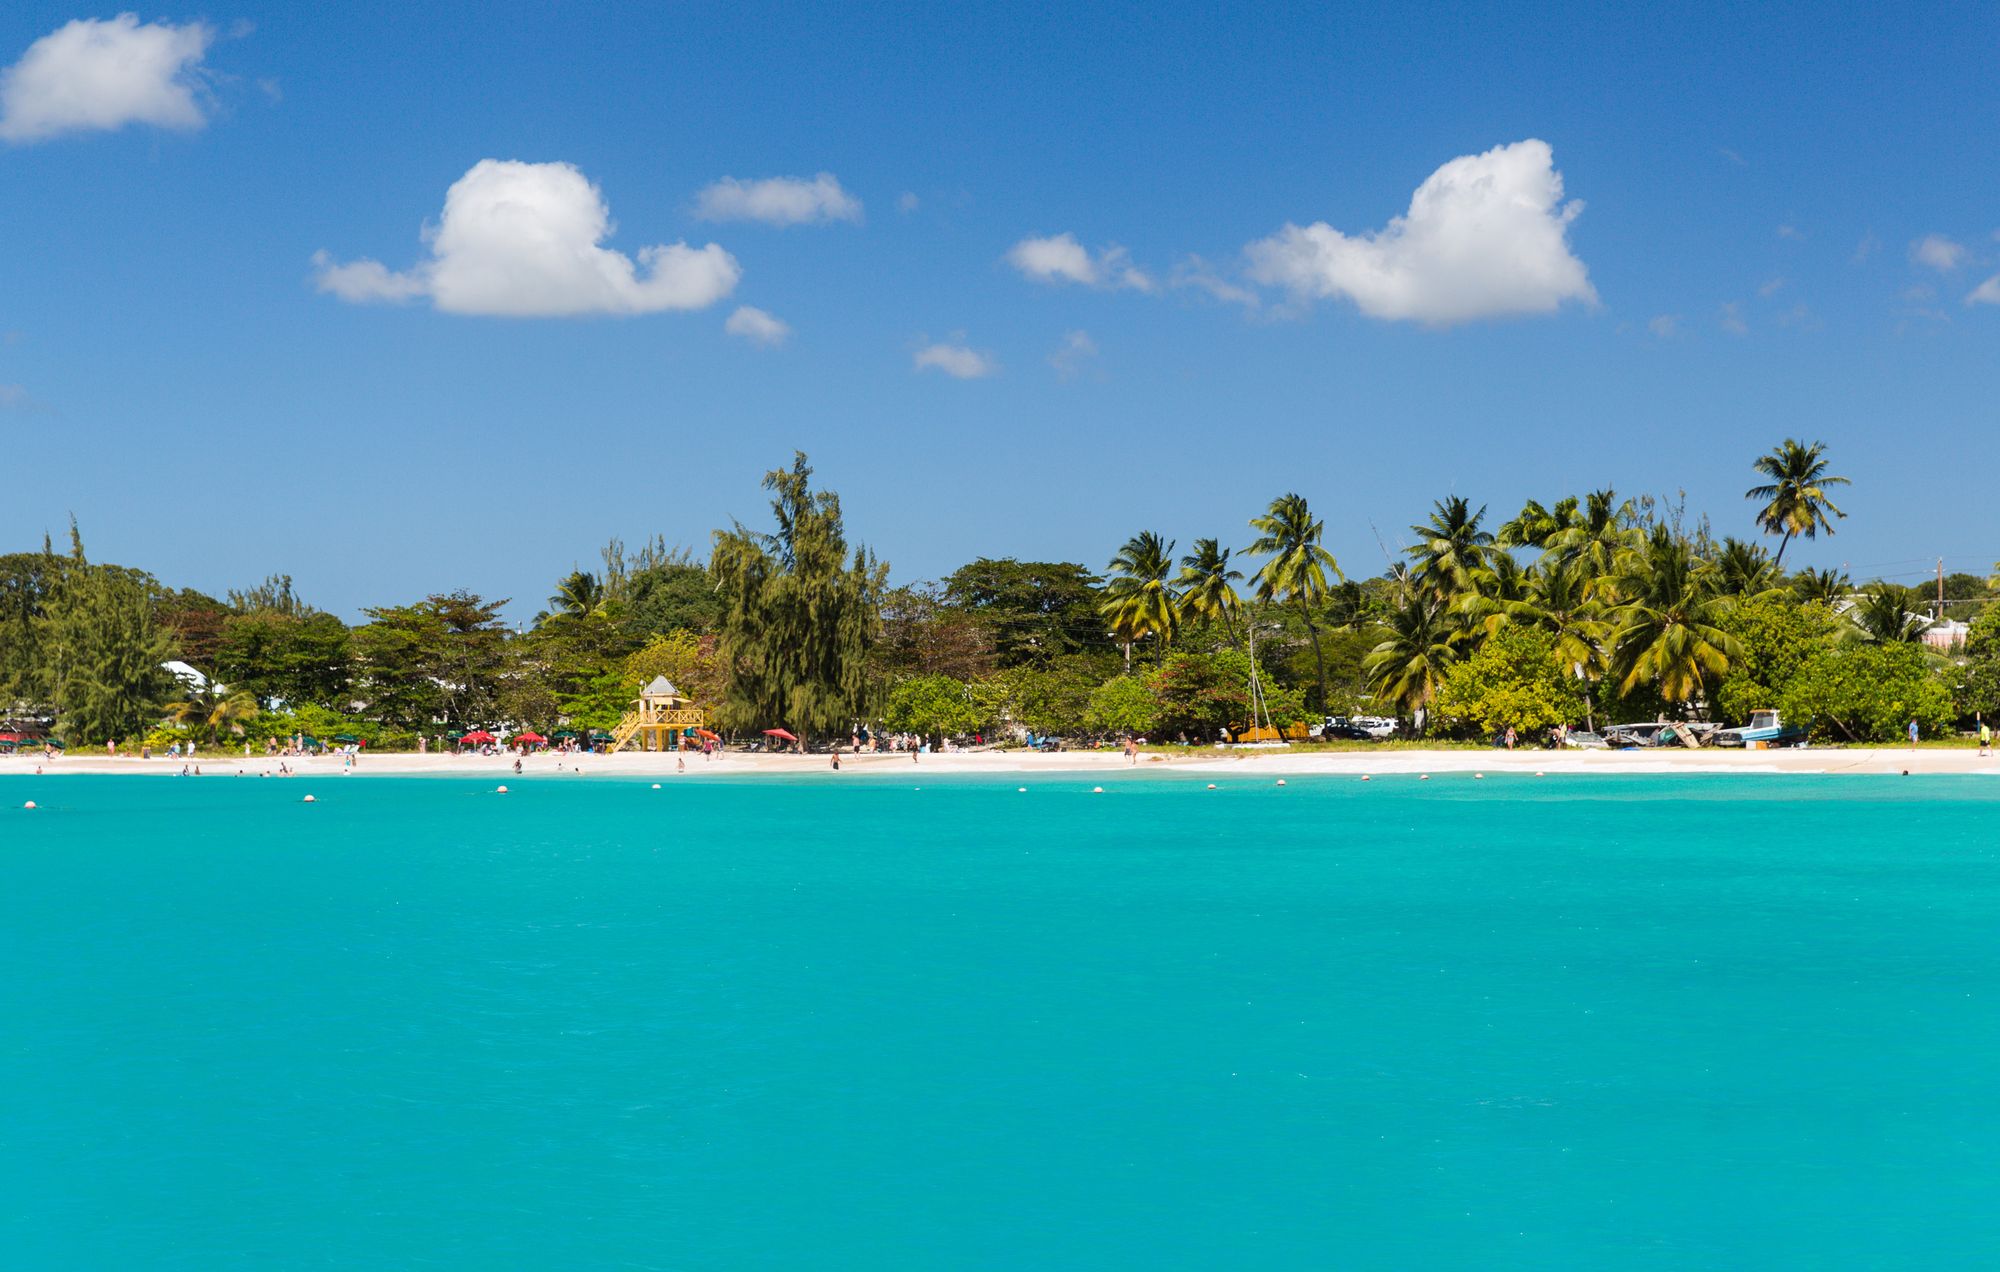 Spend The Day At Carlisle Bay In Barbados!